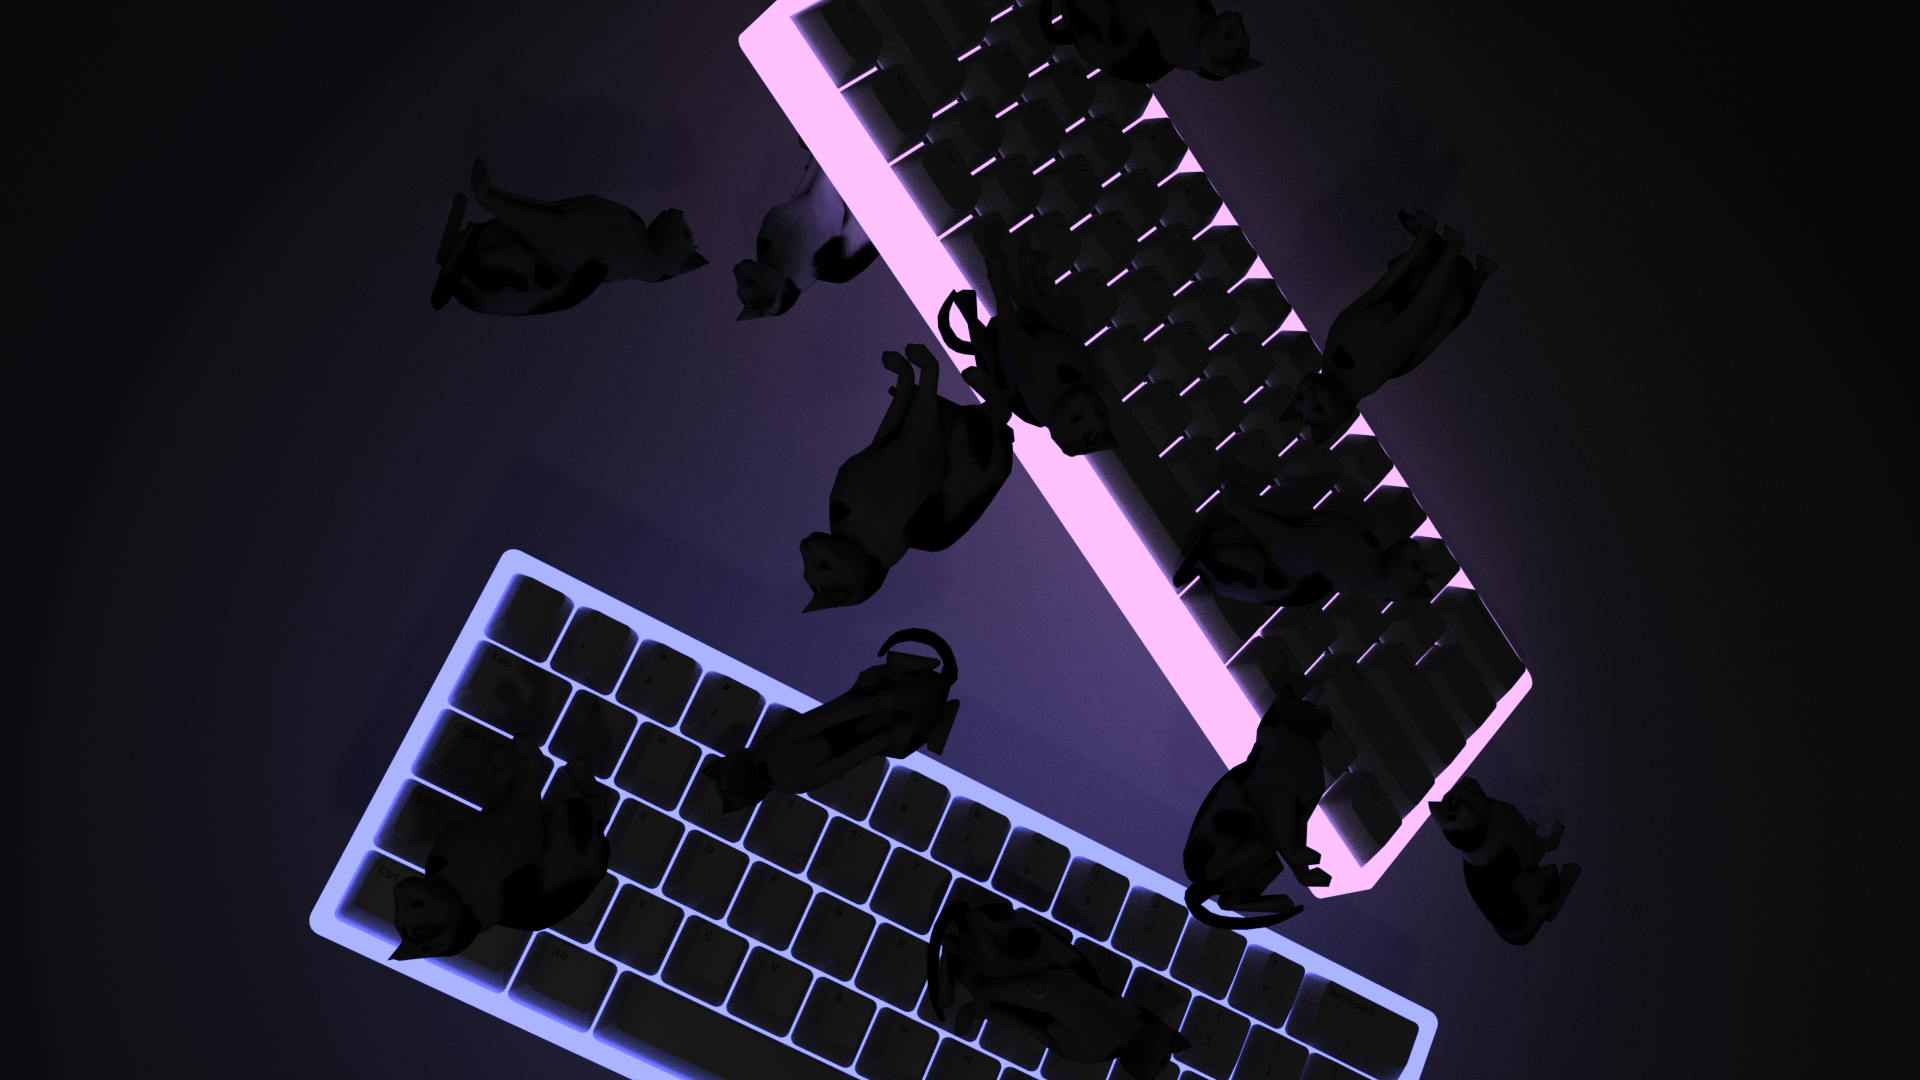 Keyboards Falling With Cats Aesthetic 4k Wallpaper